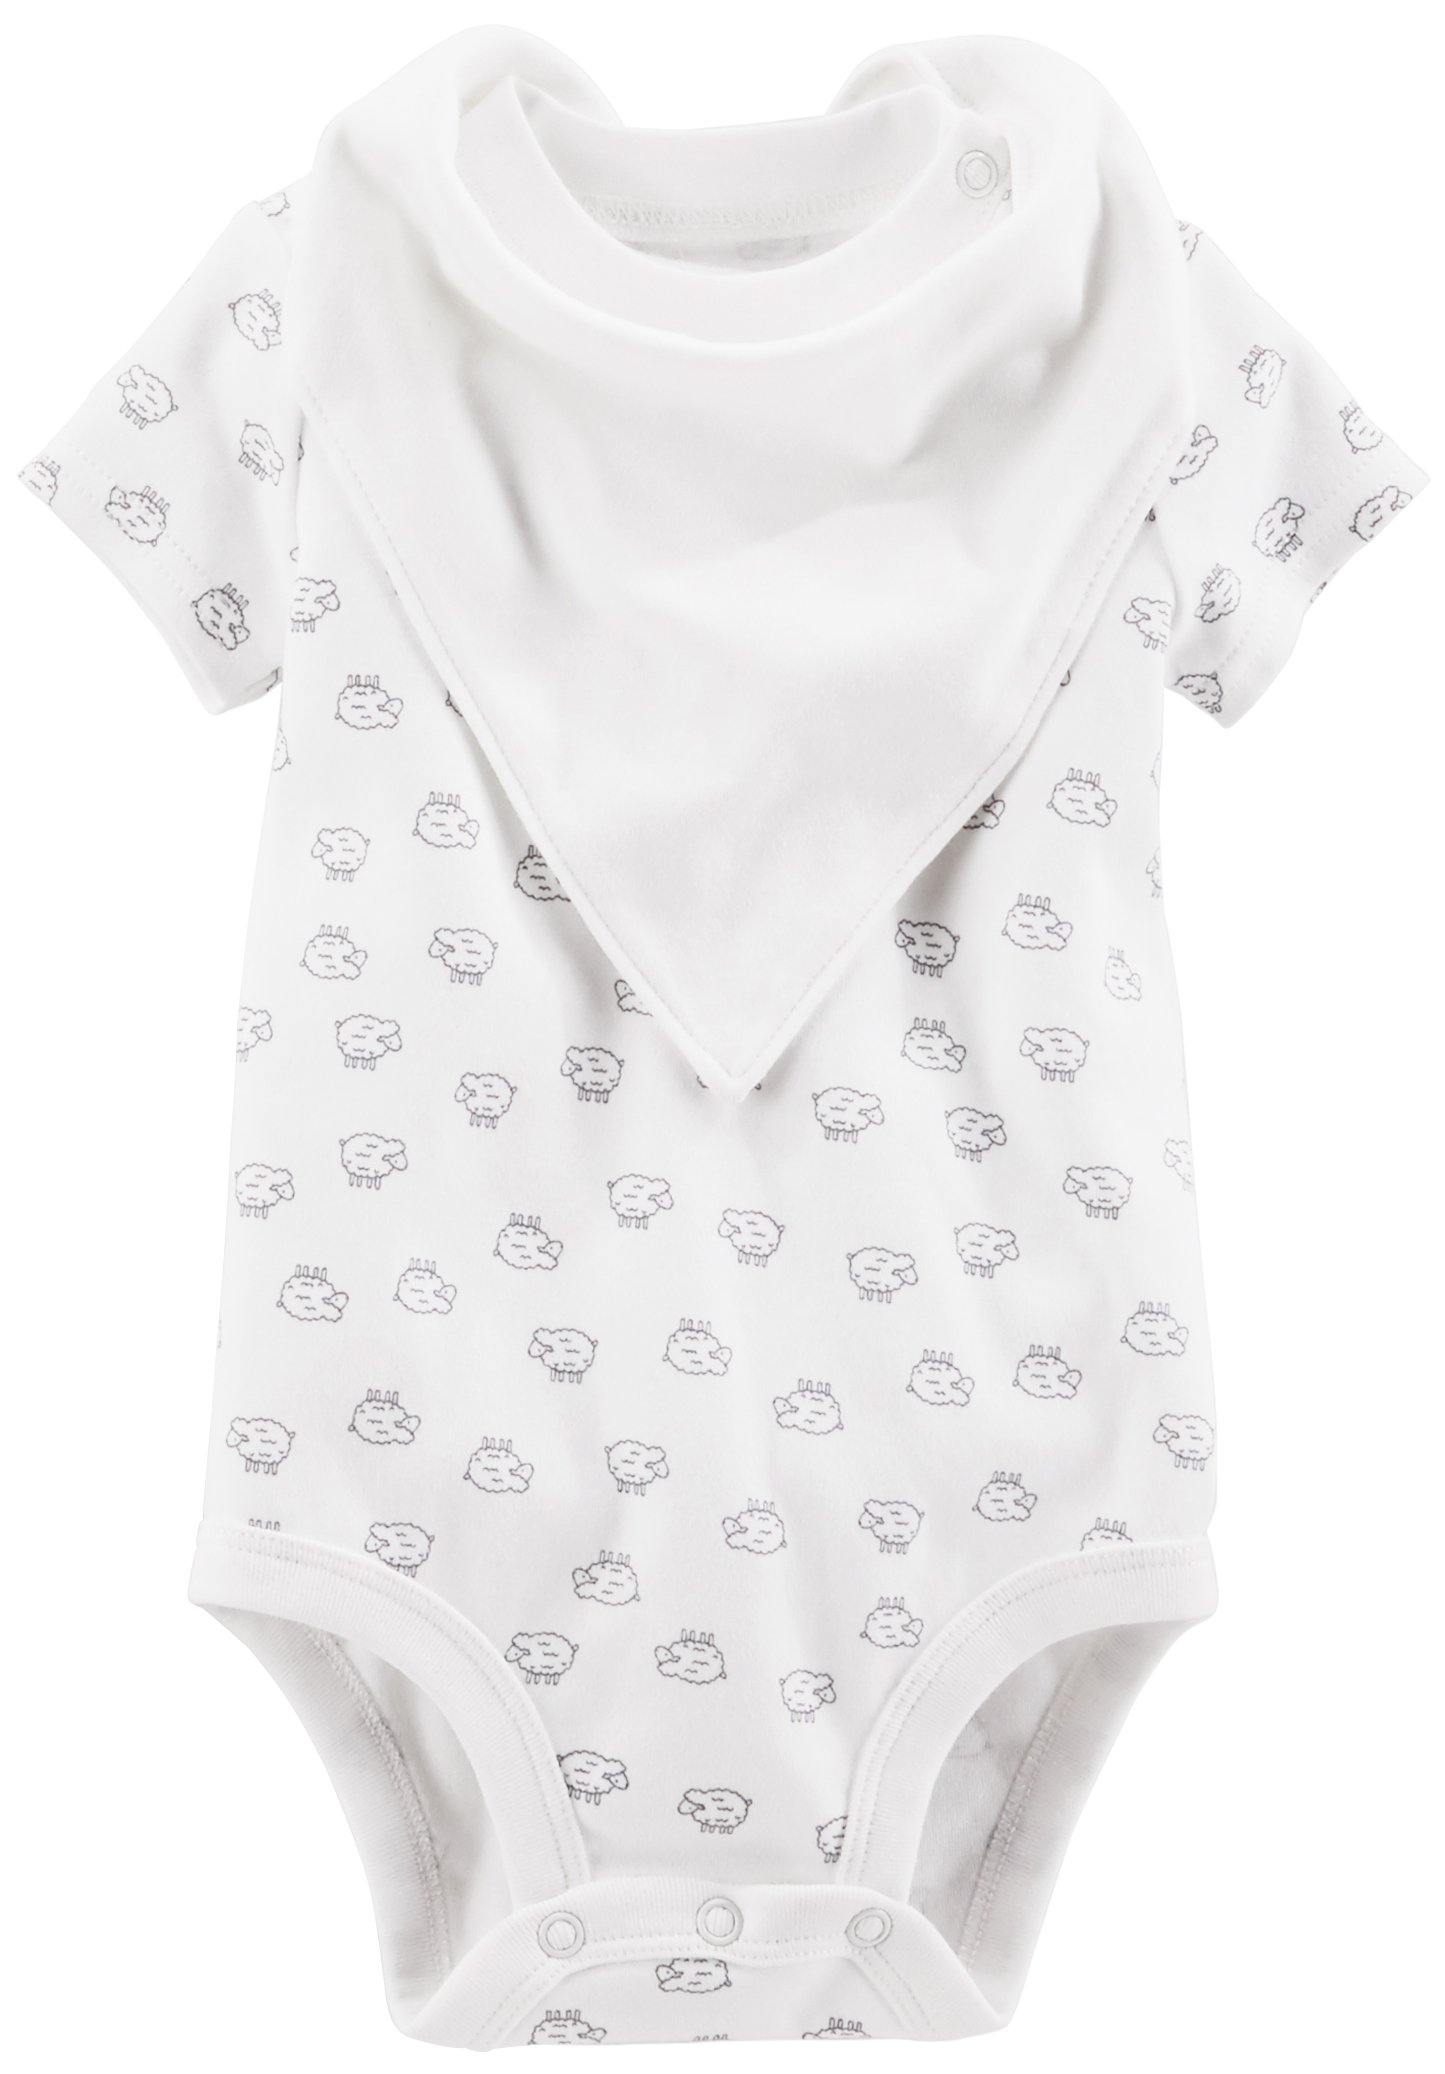 Simple Joys by Carter's Baby Girls' 4-Piece Neutral Bodysuit, Pant, Bib, and Cap Set, Pack of 4